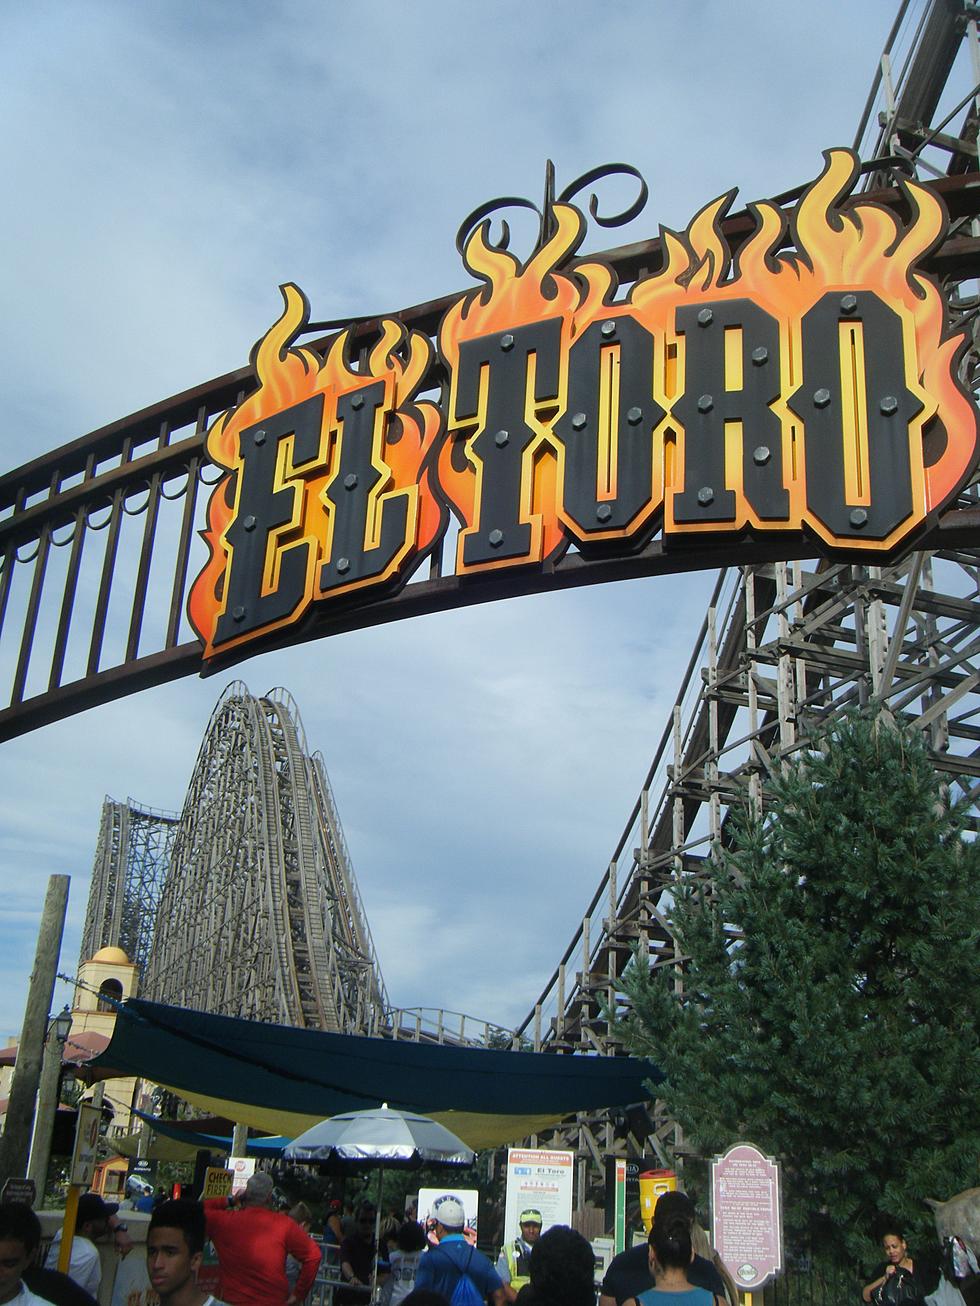 Six Flags Great Adventure Announces &#8220;Coaster Power Hours&#8221; in Jackson, NJ[Photo Gallery]